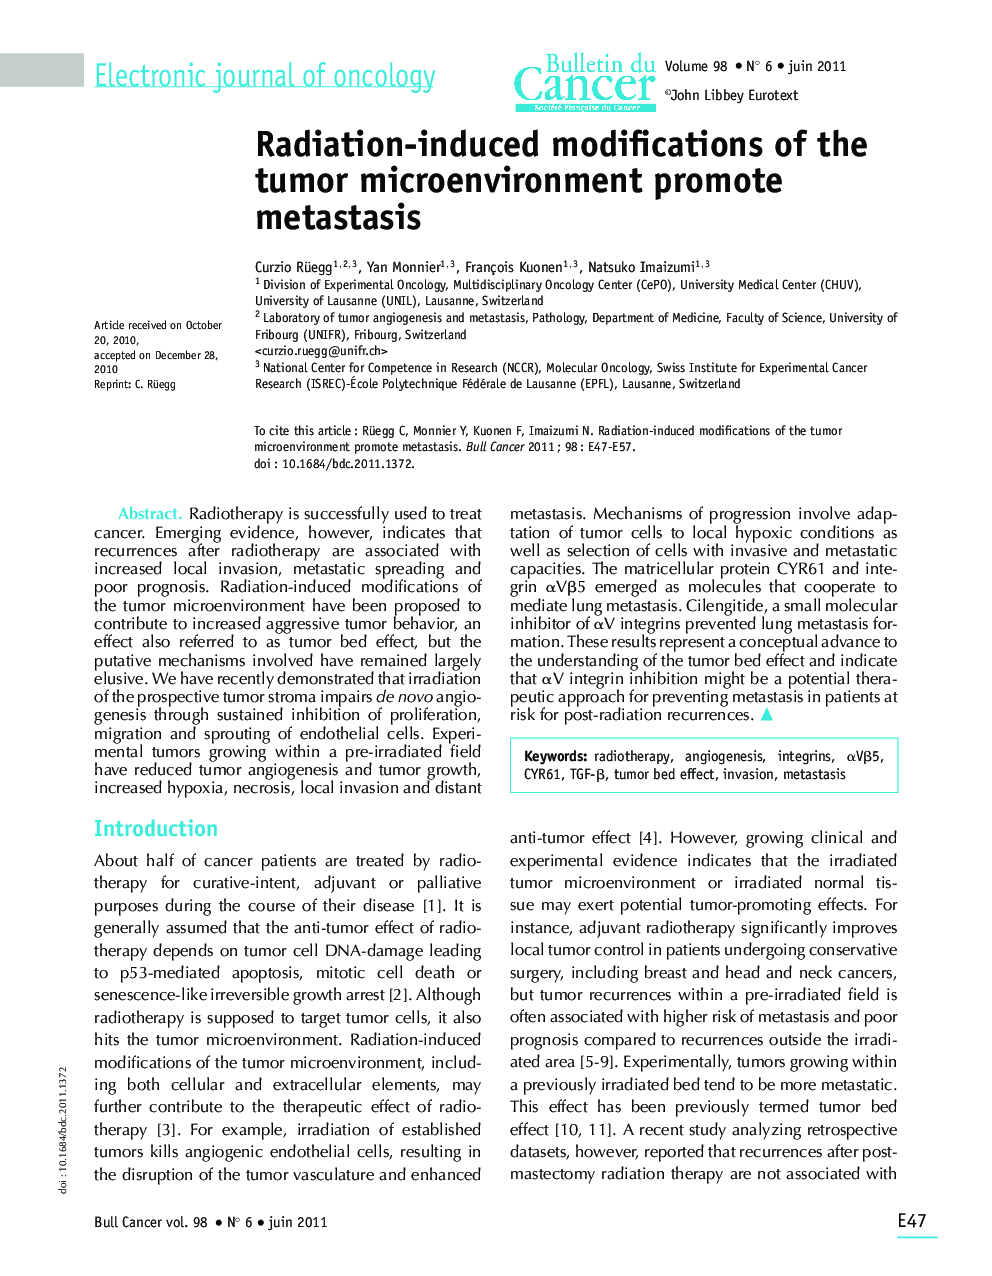 Radiation-induced modifications of the tumor microenvironment promote metastasis